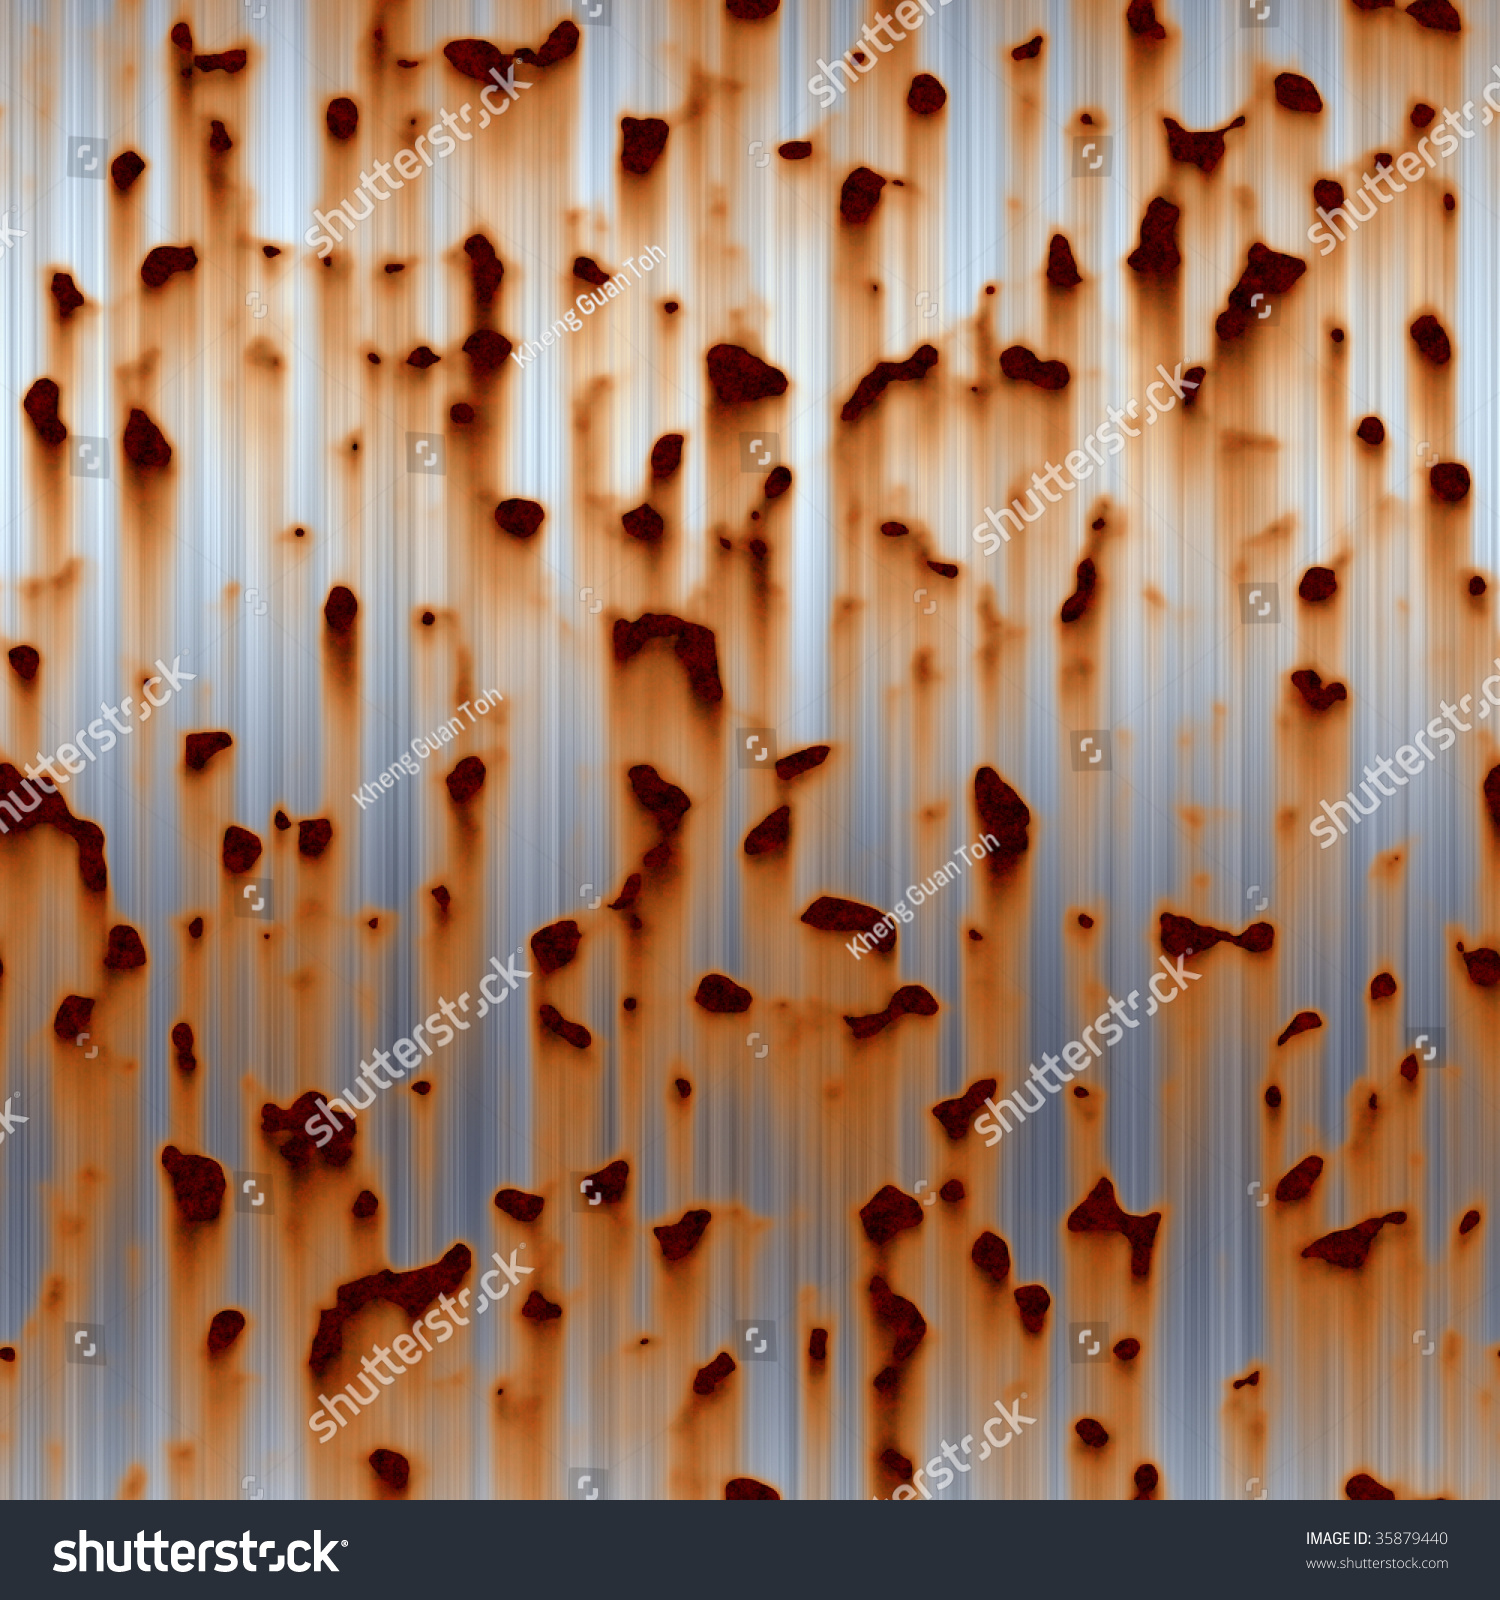 Worn Rusted Metal Surface Texture Backgrond Stock Illustration ...